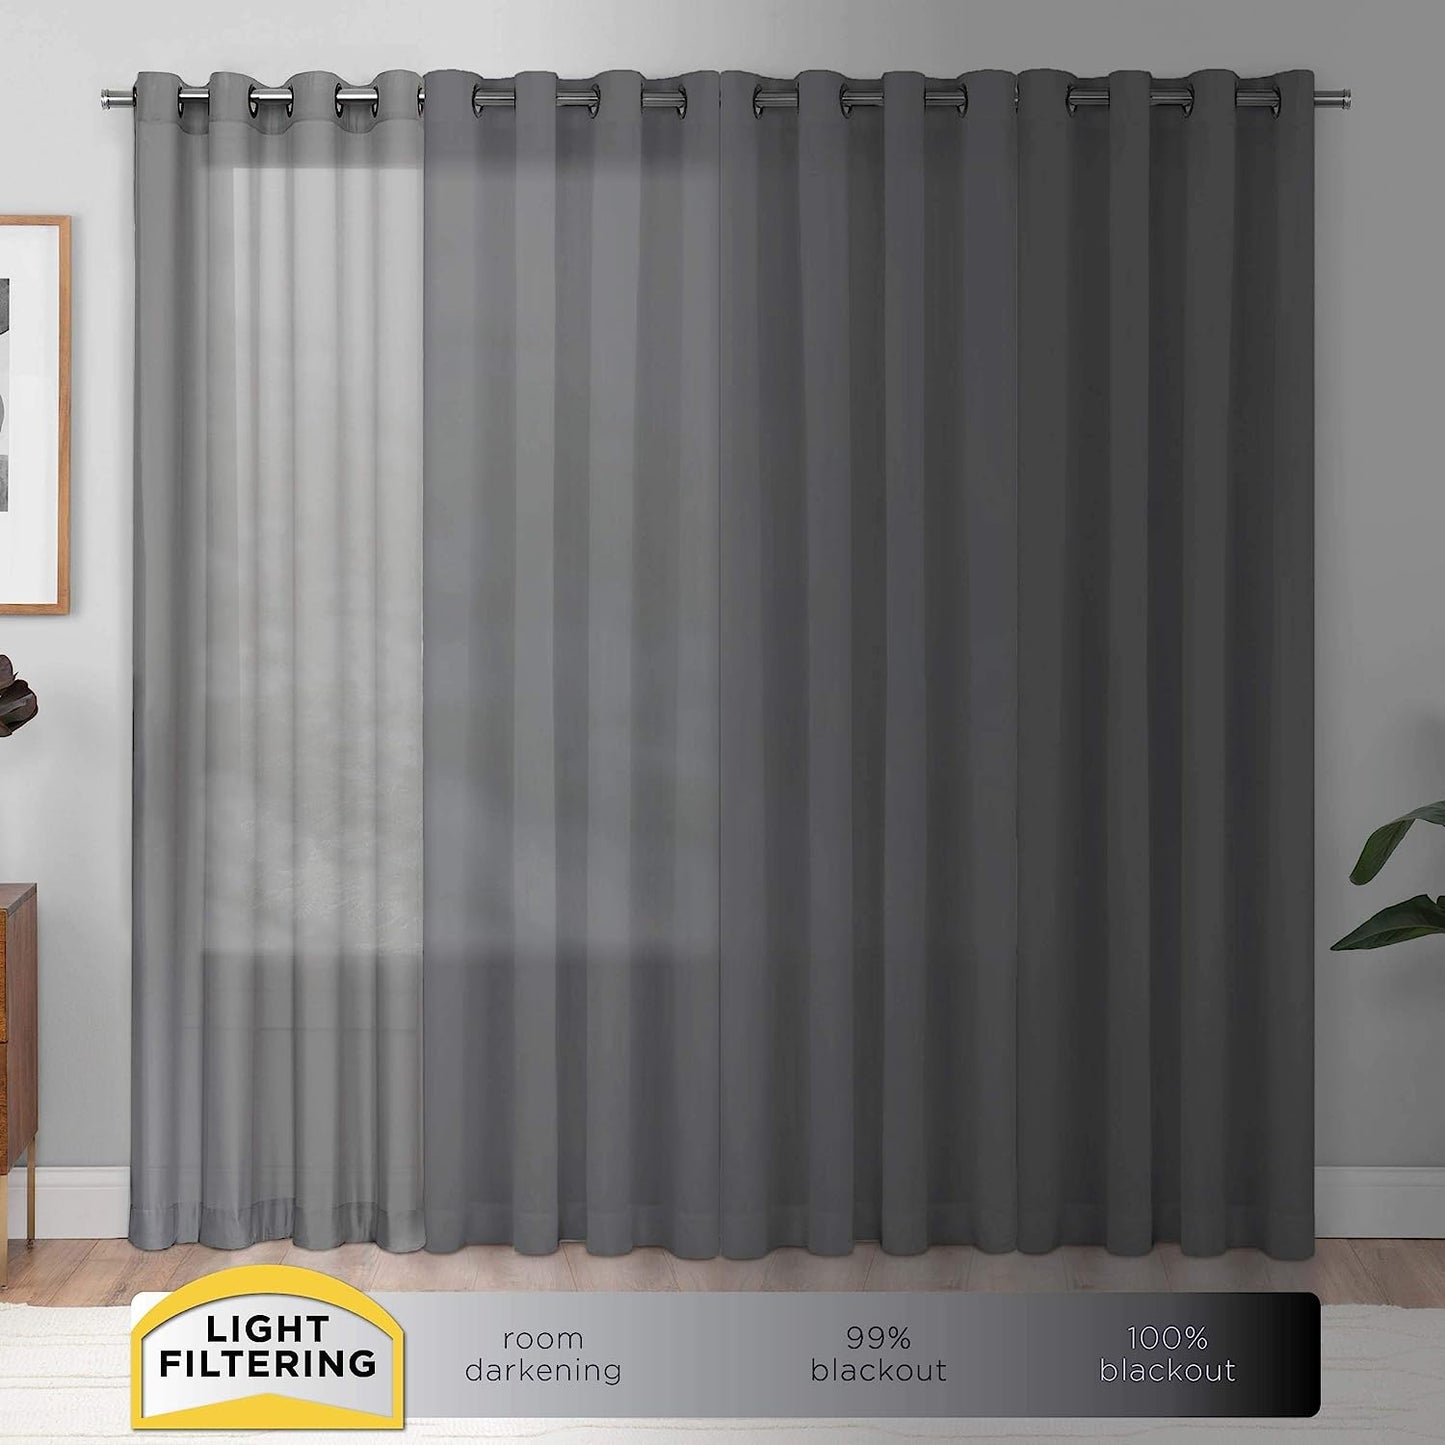 Pairs to Go Victoria Voile Modern Sheer Rod Pocket Window Curtains for Living Room (2 Panels), 59 in X 84 In, Taupe  Ellery Homestyles   